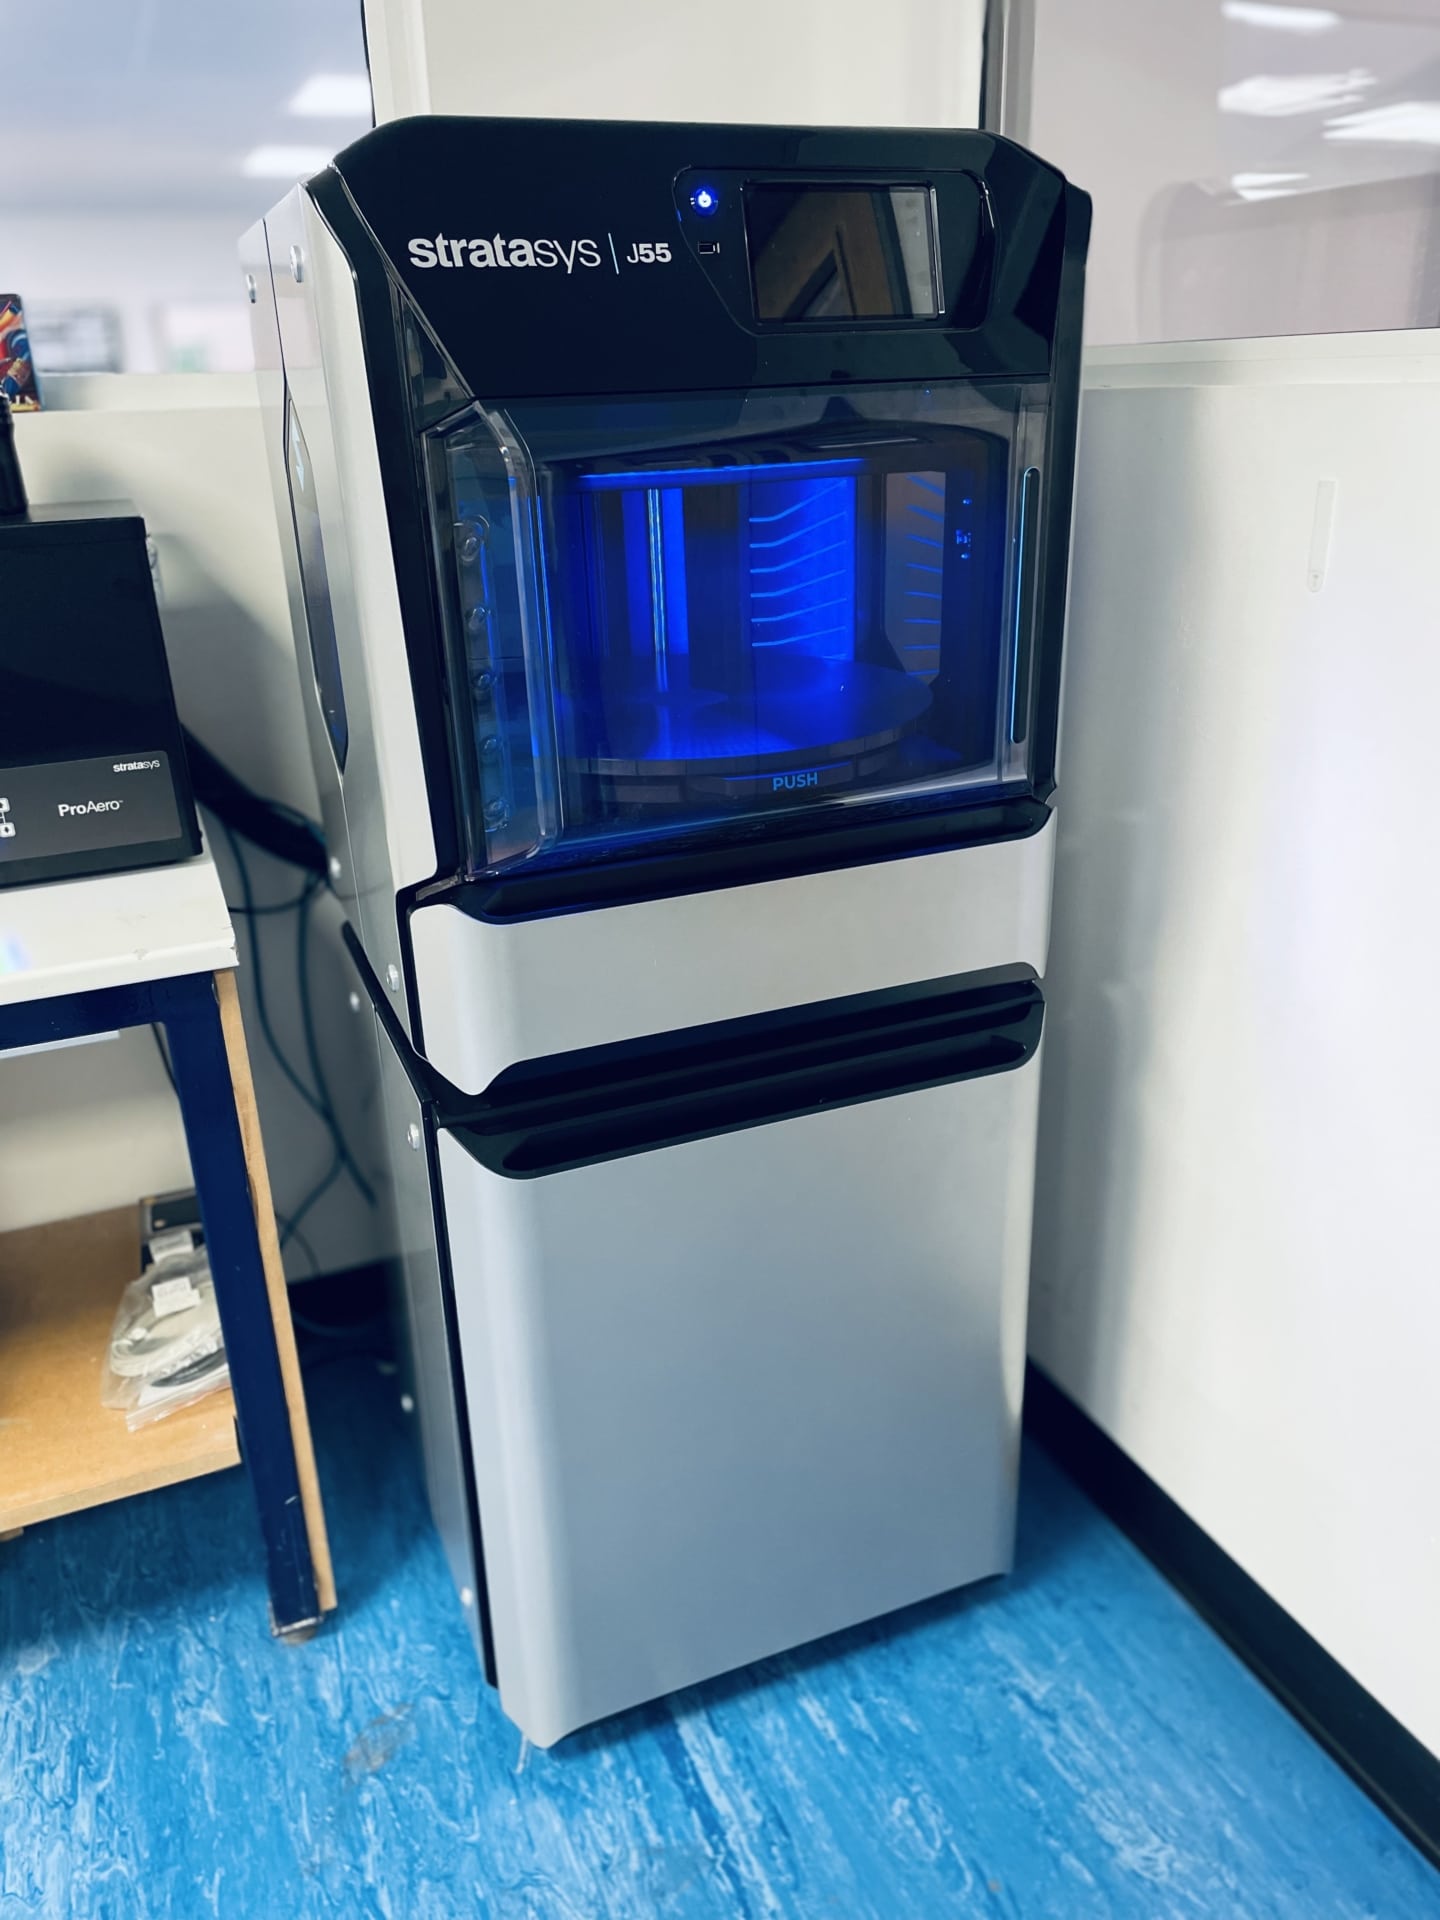 The new PolyJet 3D printer, J55 Prime, from Stratasys that we purchased to expand our PolyJet 3D printing services